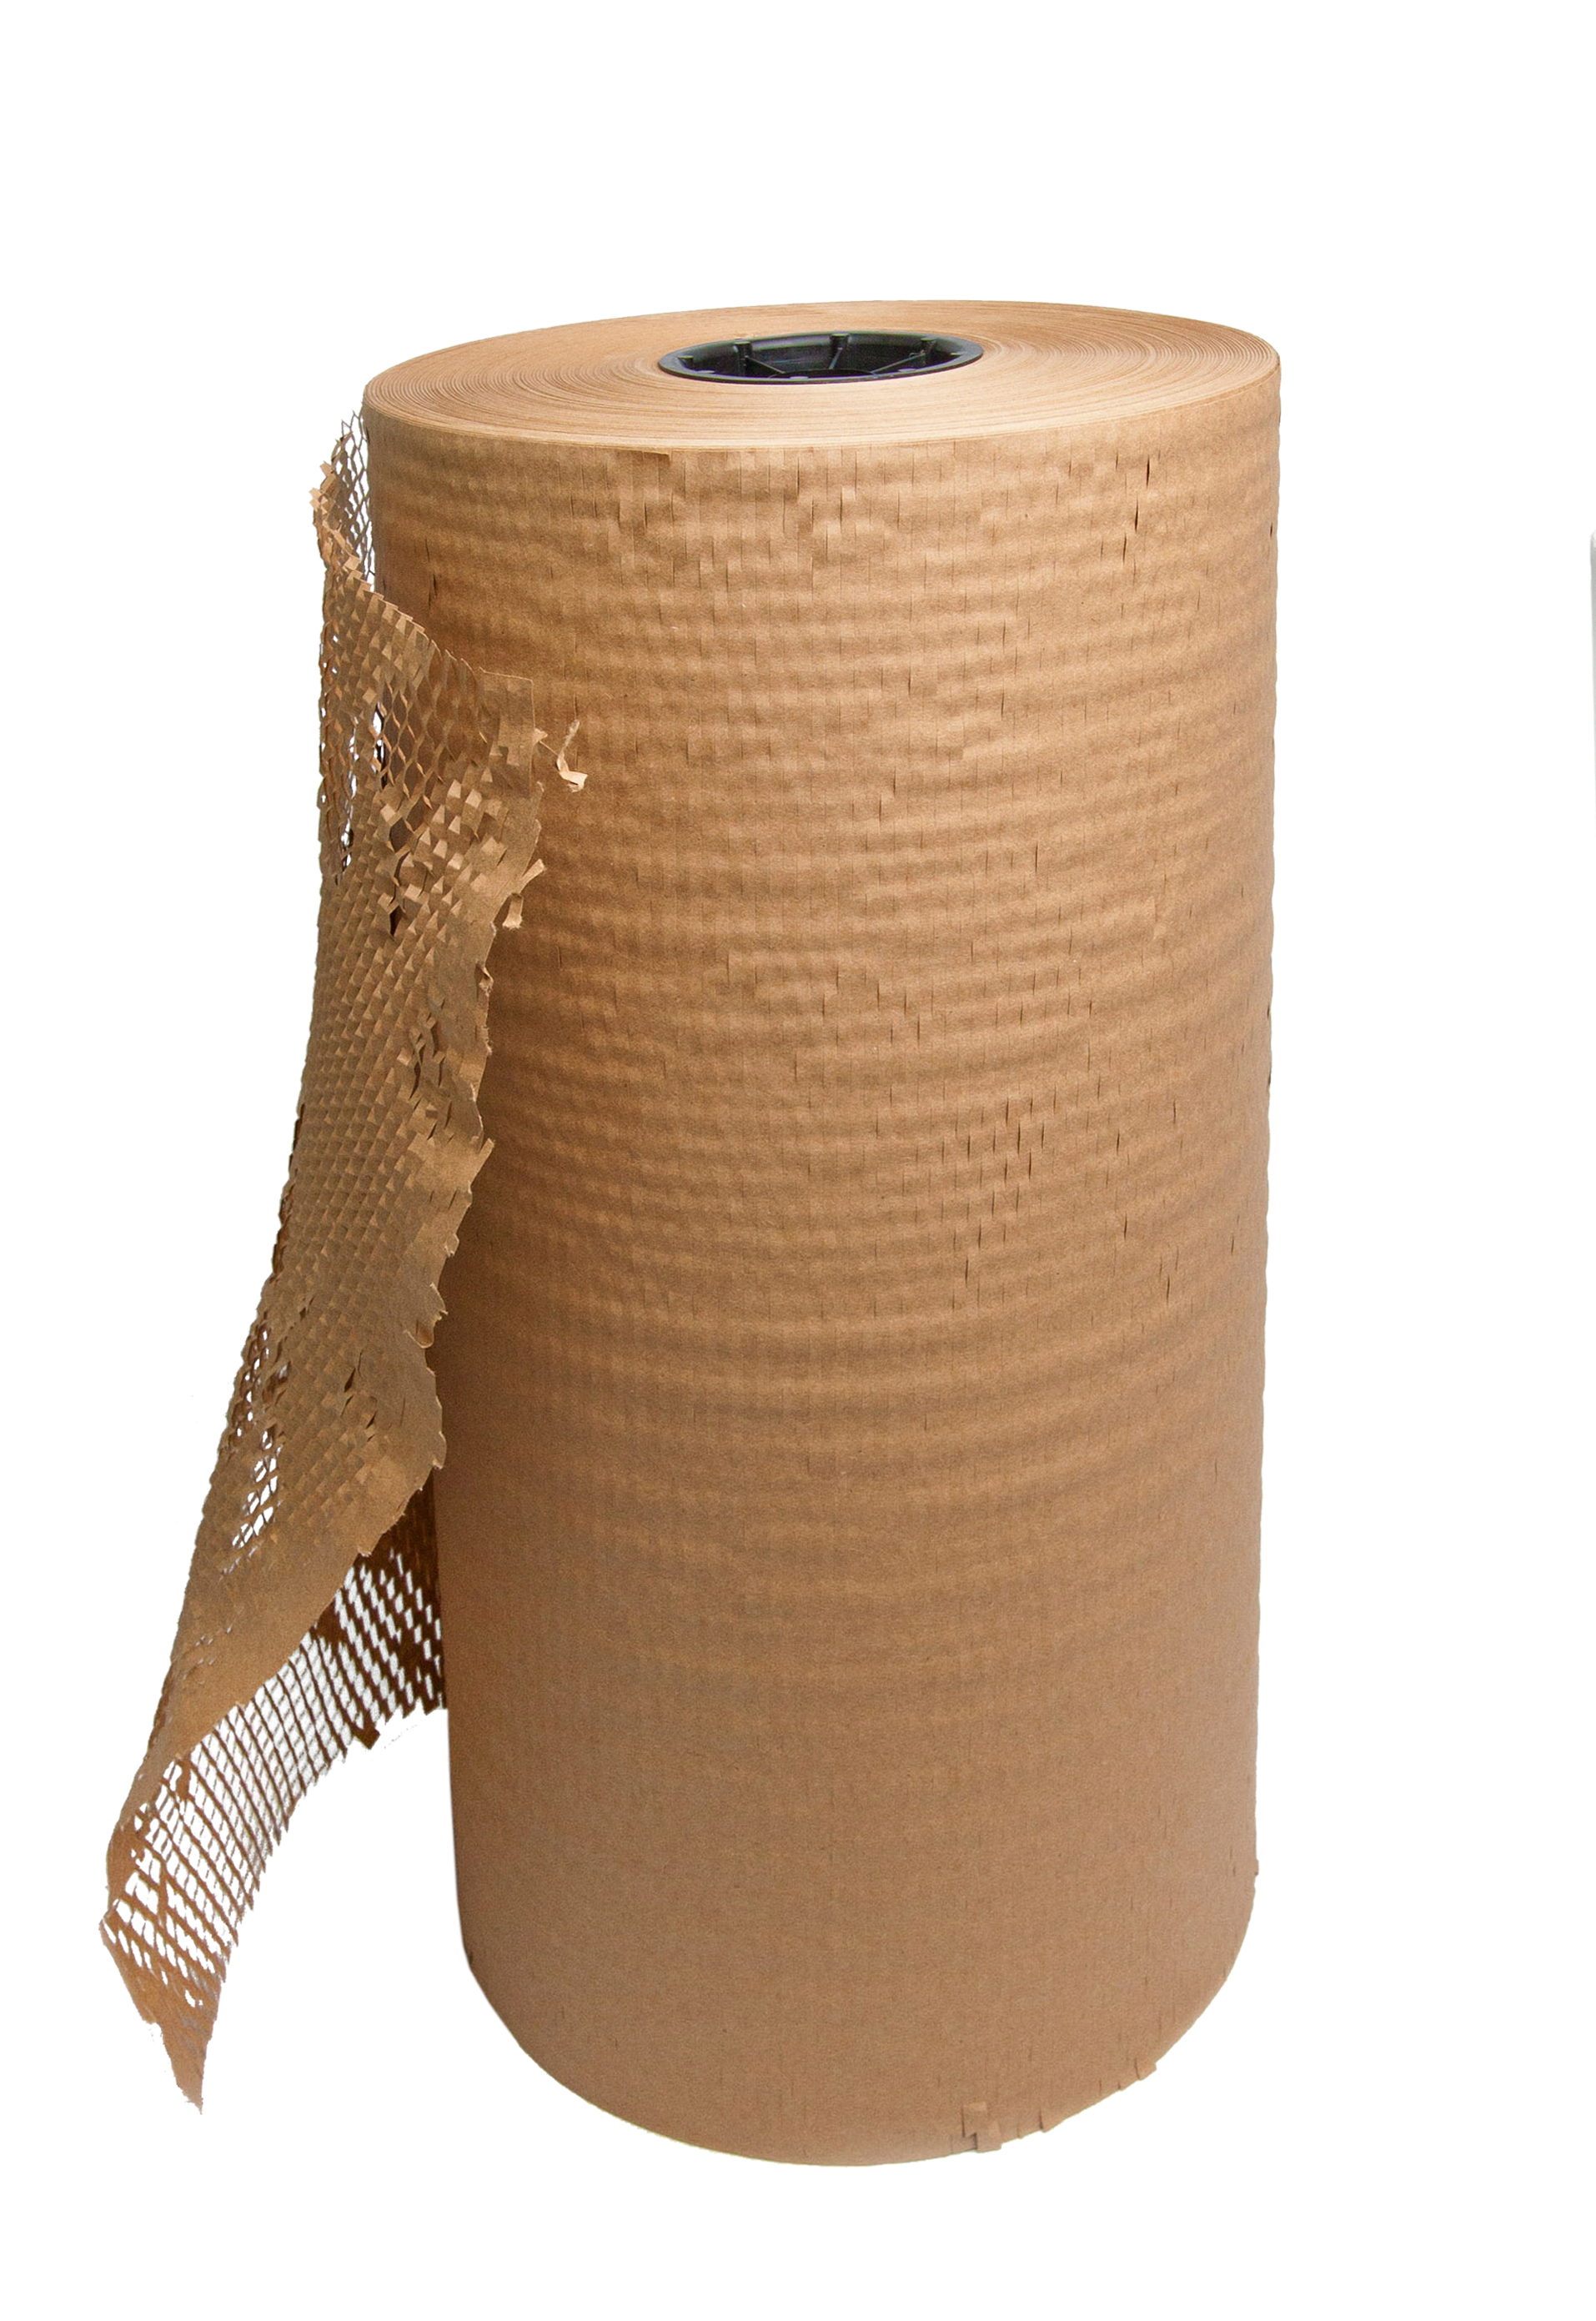 Painting Paper Roll Cheapest Shop, Save 60% | jlcatj.gob.mx